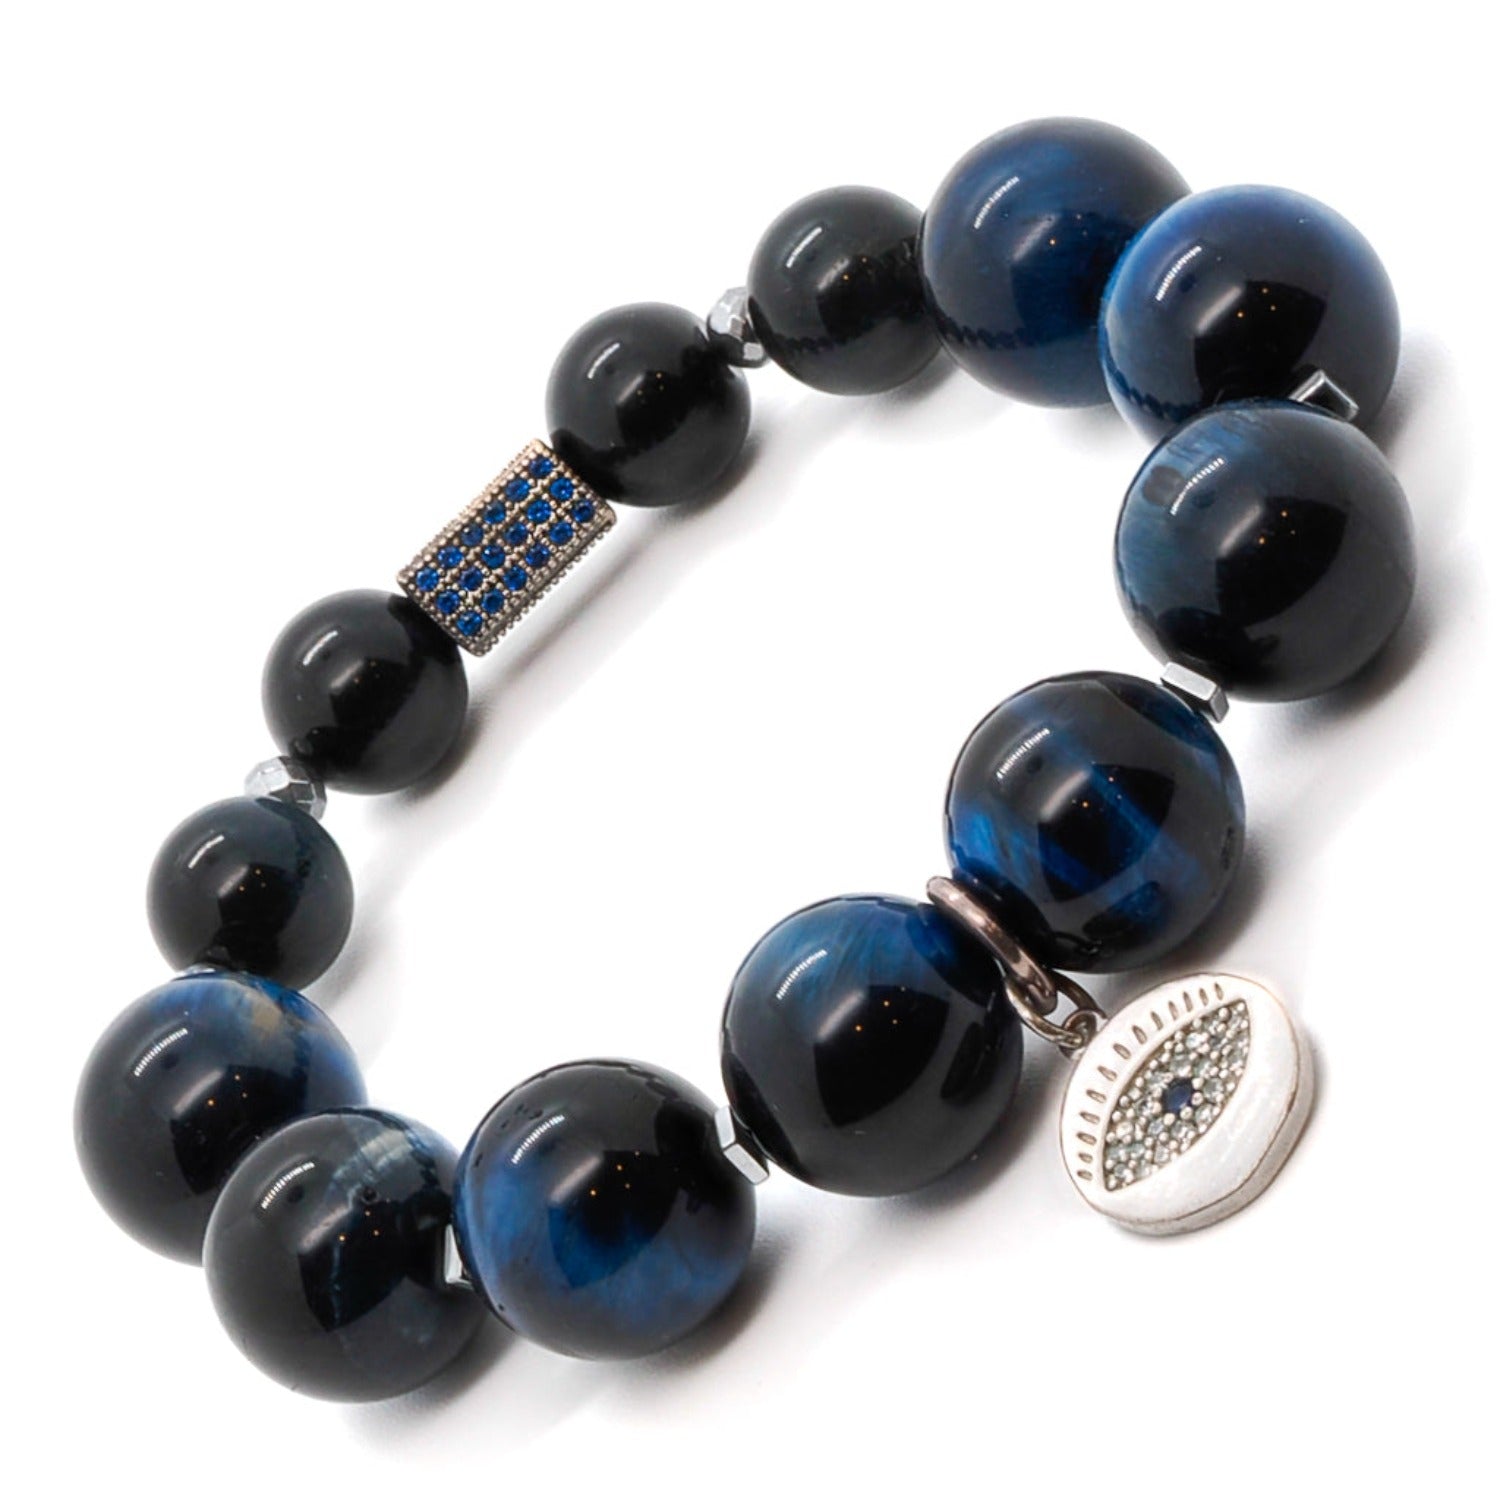 The Power Of Eye Bracelet exudes confidence and style with its Blue Tiger's Eye stone beads and sterling silver evil eye charm.